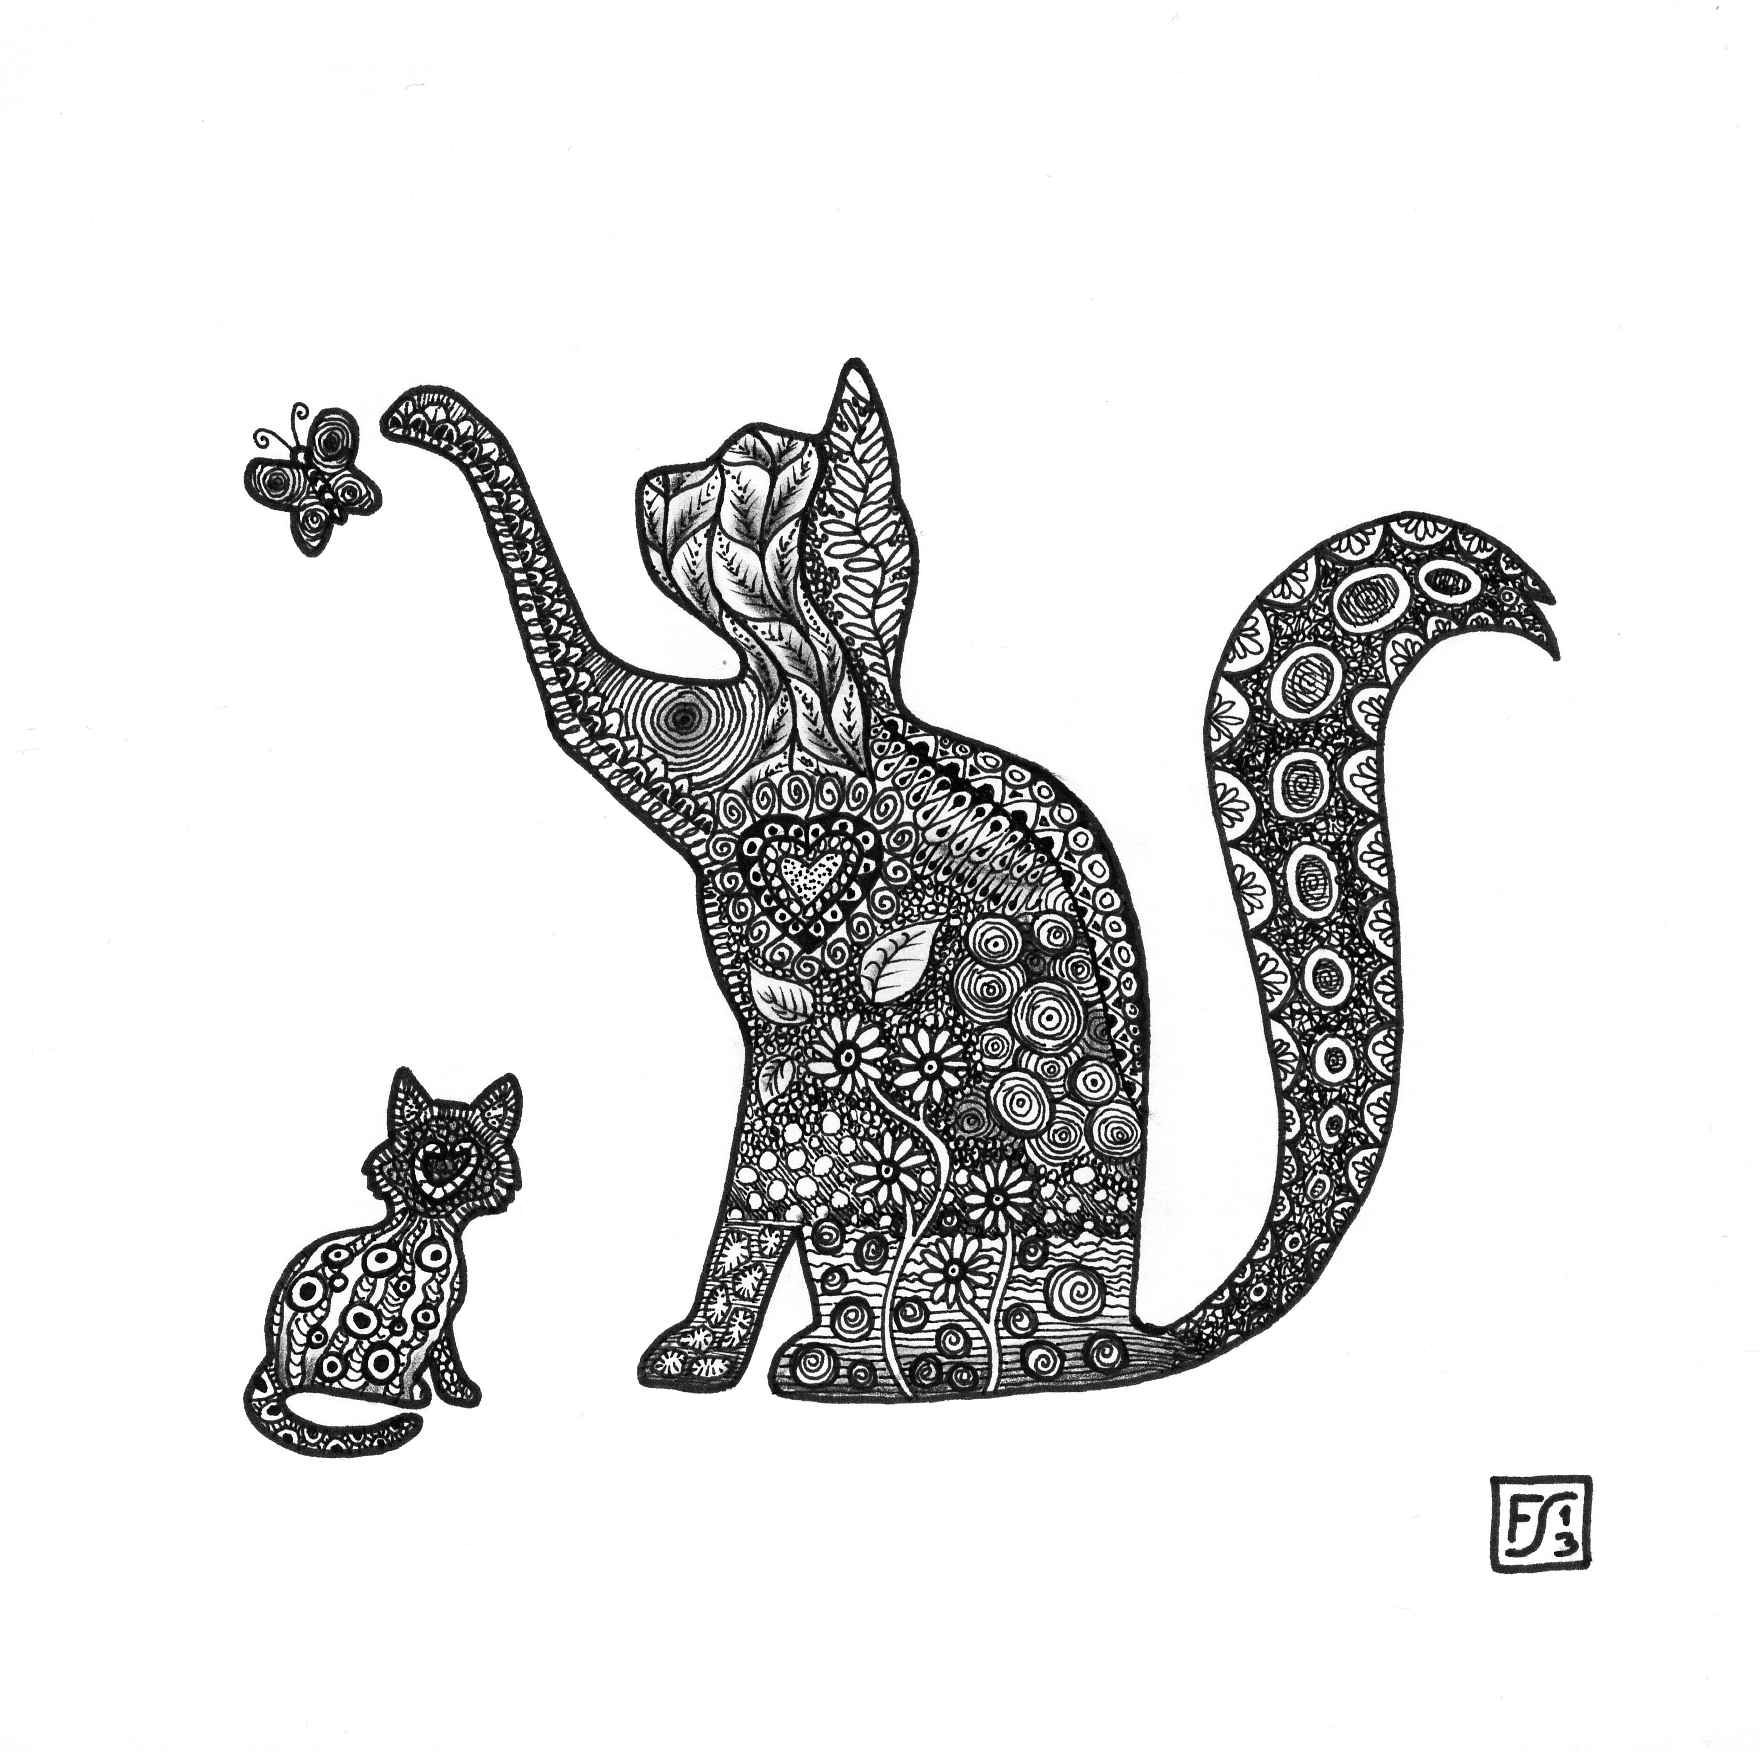 50 Abstract Cat Art Black And White Friend Quotes